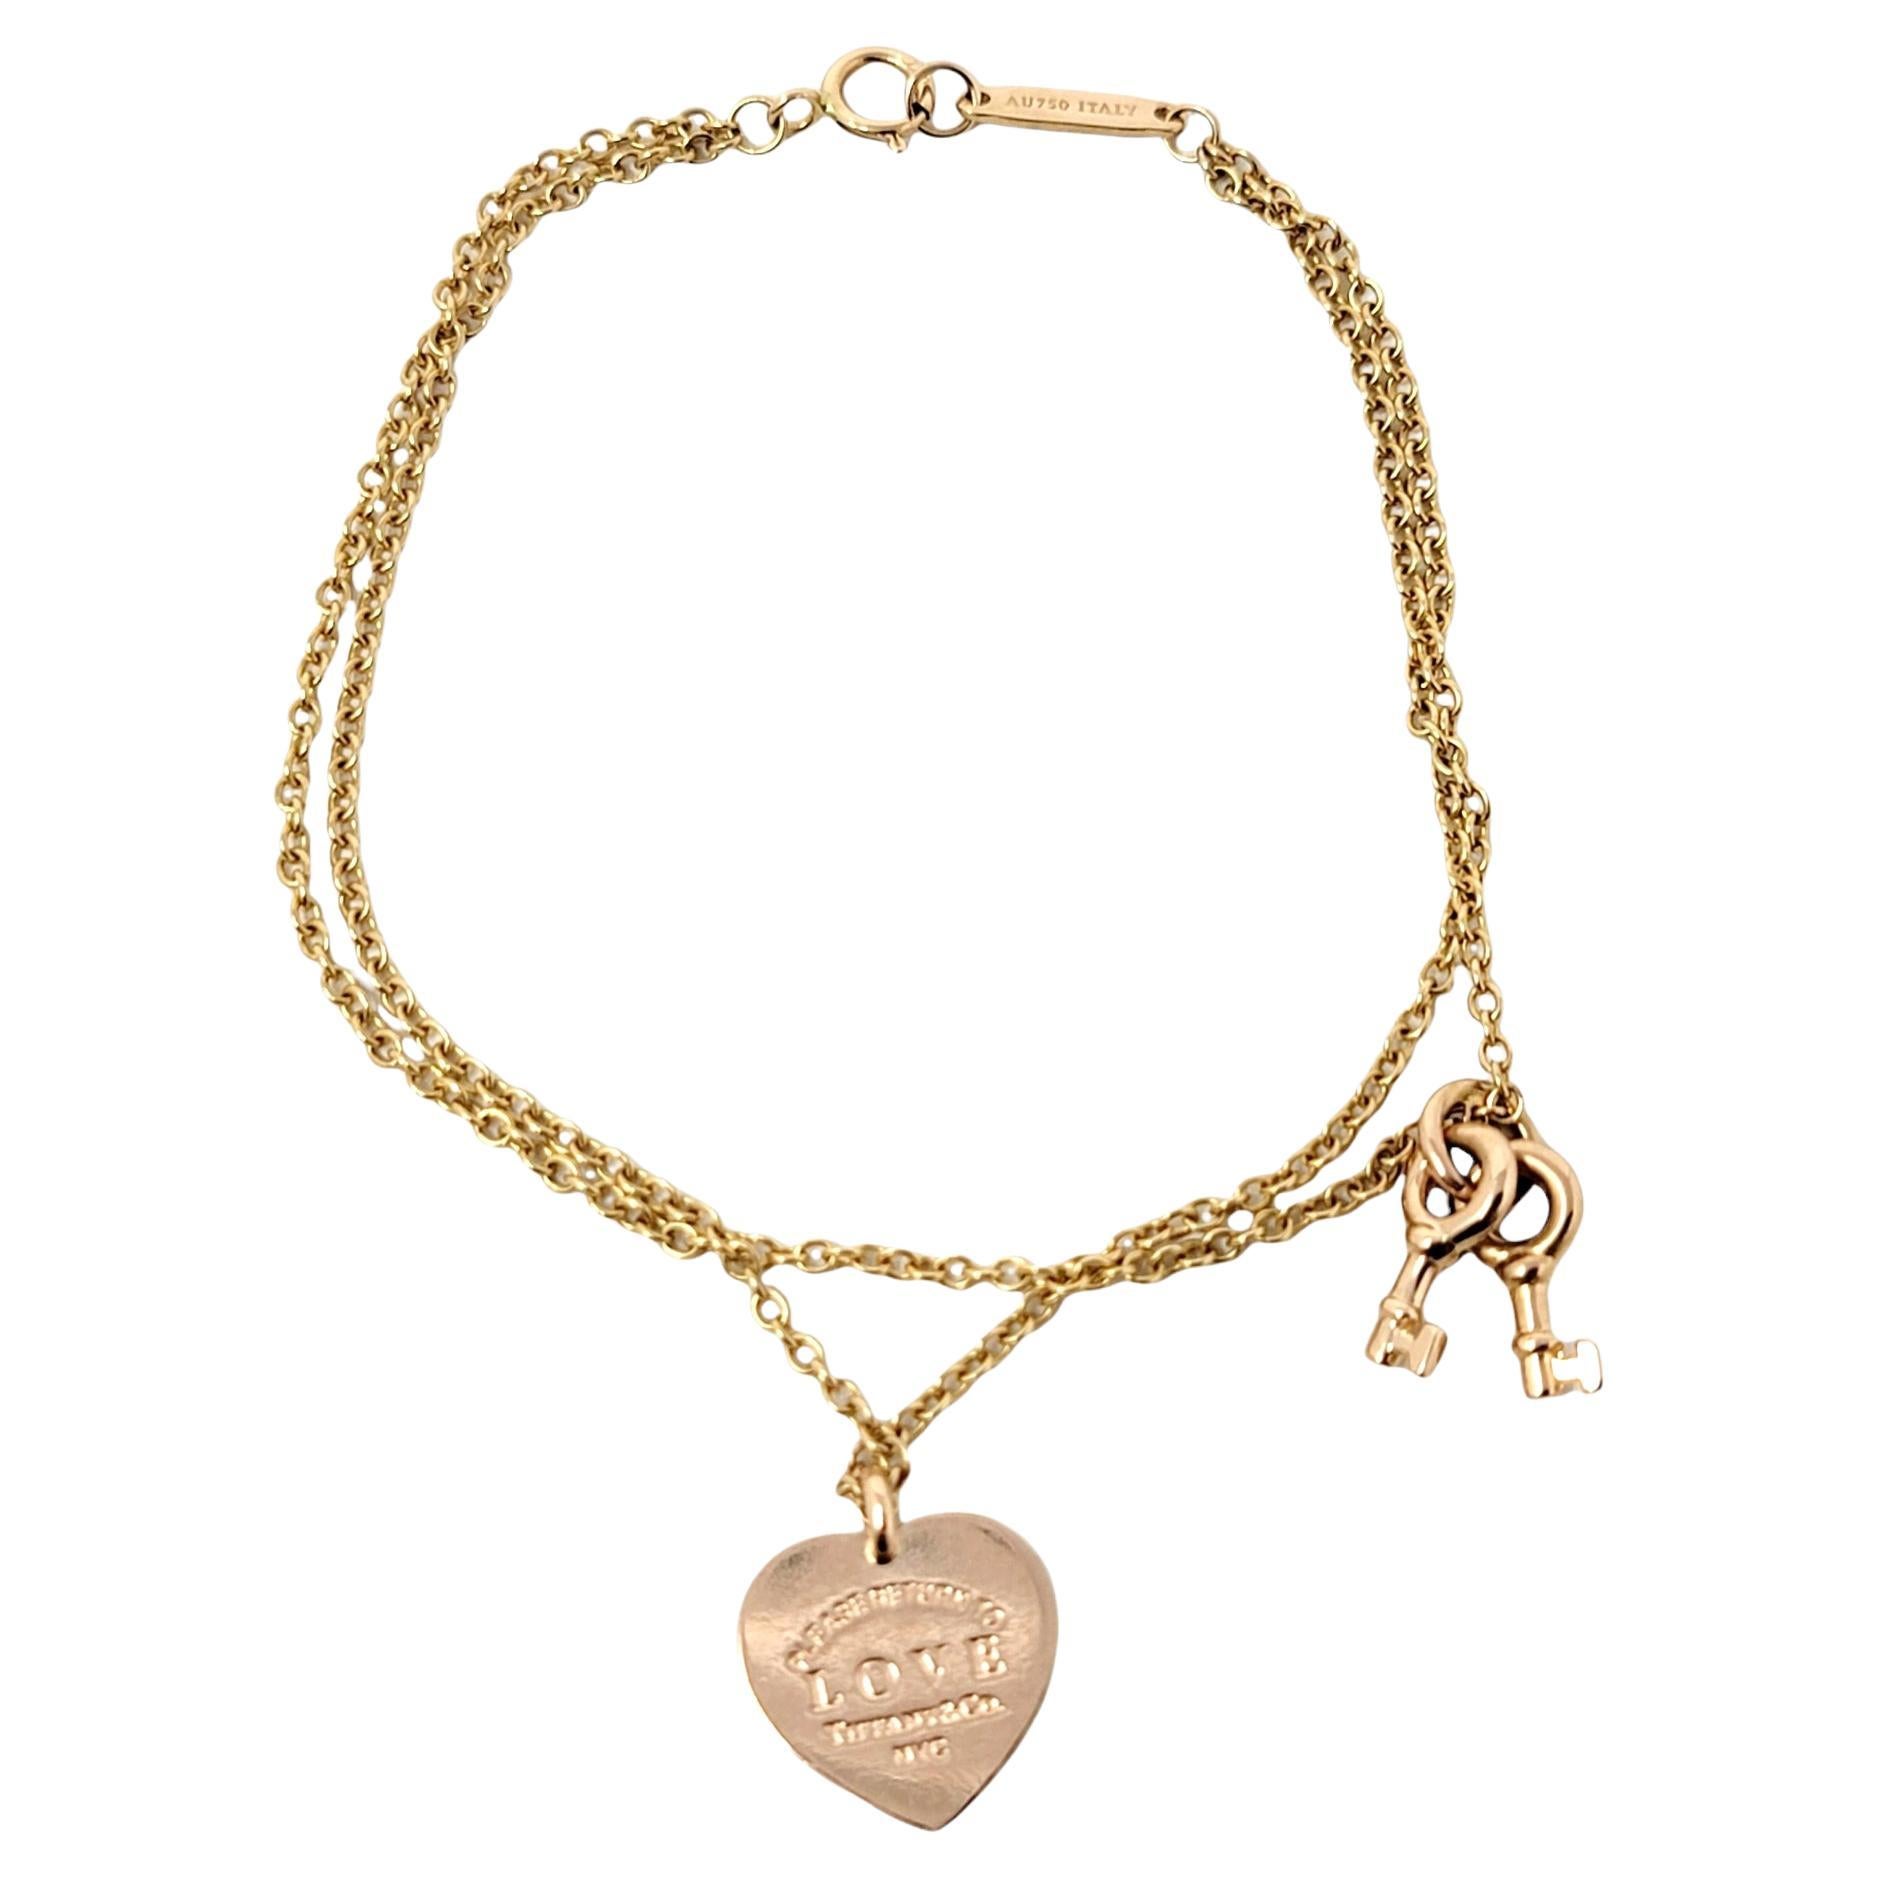 Tiffany & Co. 'Return to Tiffany' Heart Tag and Key Charms Bracelet in Rose Gold